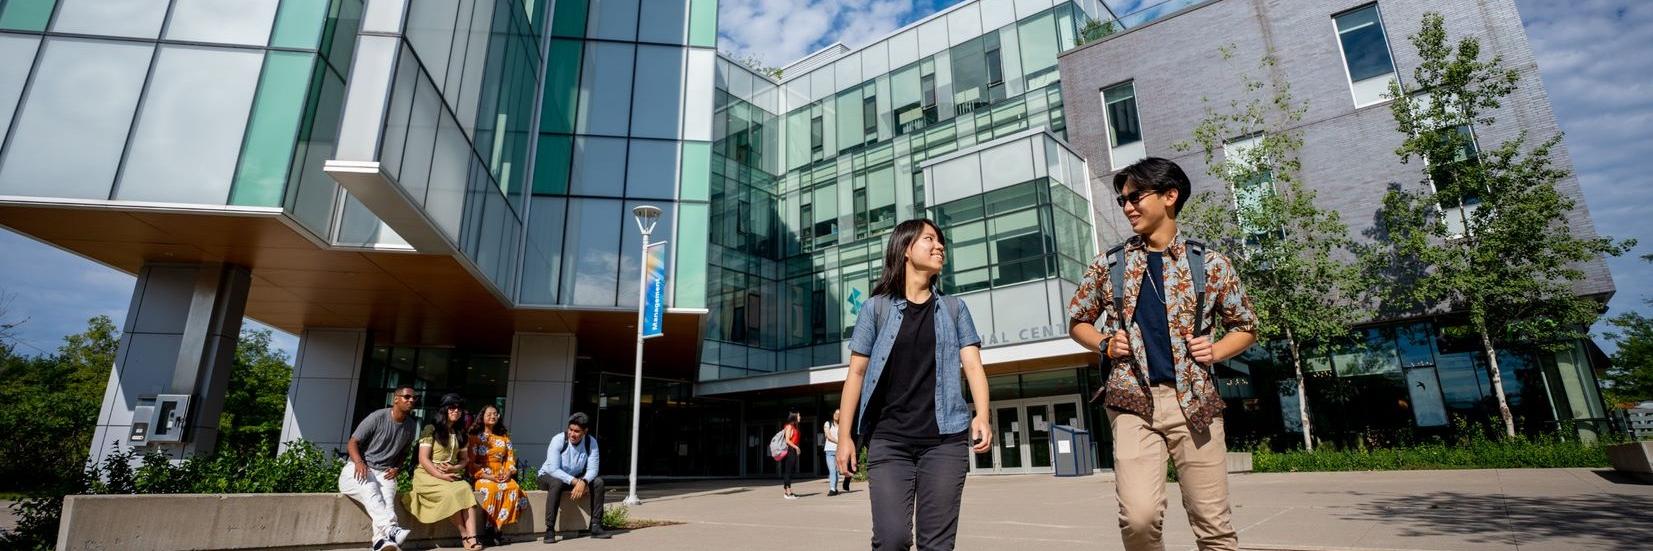 Two students walking outside Instructional Centre building at U of T Scarborough